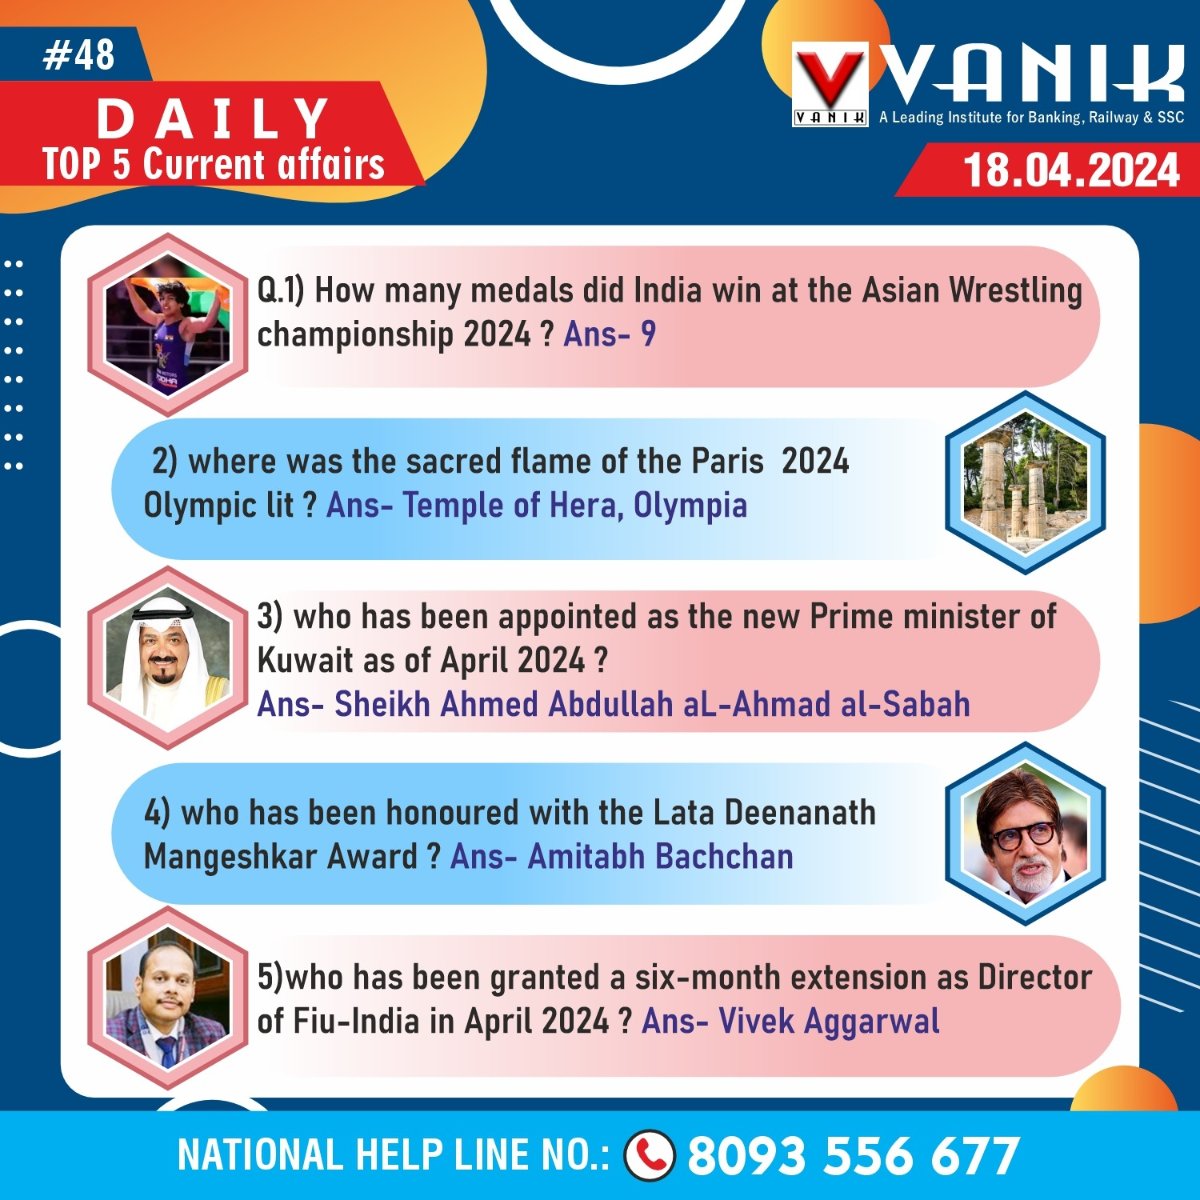 TOP CURRENT AFFAIRS Update For All The Learners..
🎯Top 5 CURRENT AFFAIRS👇

📌Stay Updated with  Today’s Top 5 News
👉For More News Follow Us @VANIK
🔄 LIKE, COMMENTS and SHARE

#Vanik promotes quality #Education4All
.
.
#top5news #news #dailynews #sscexam #gk #worldnews